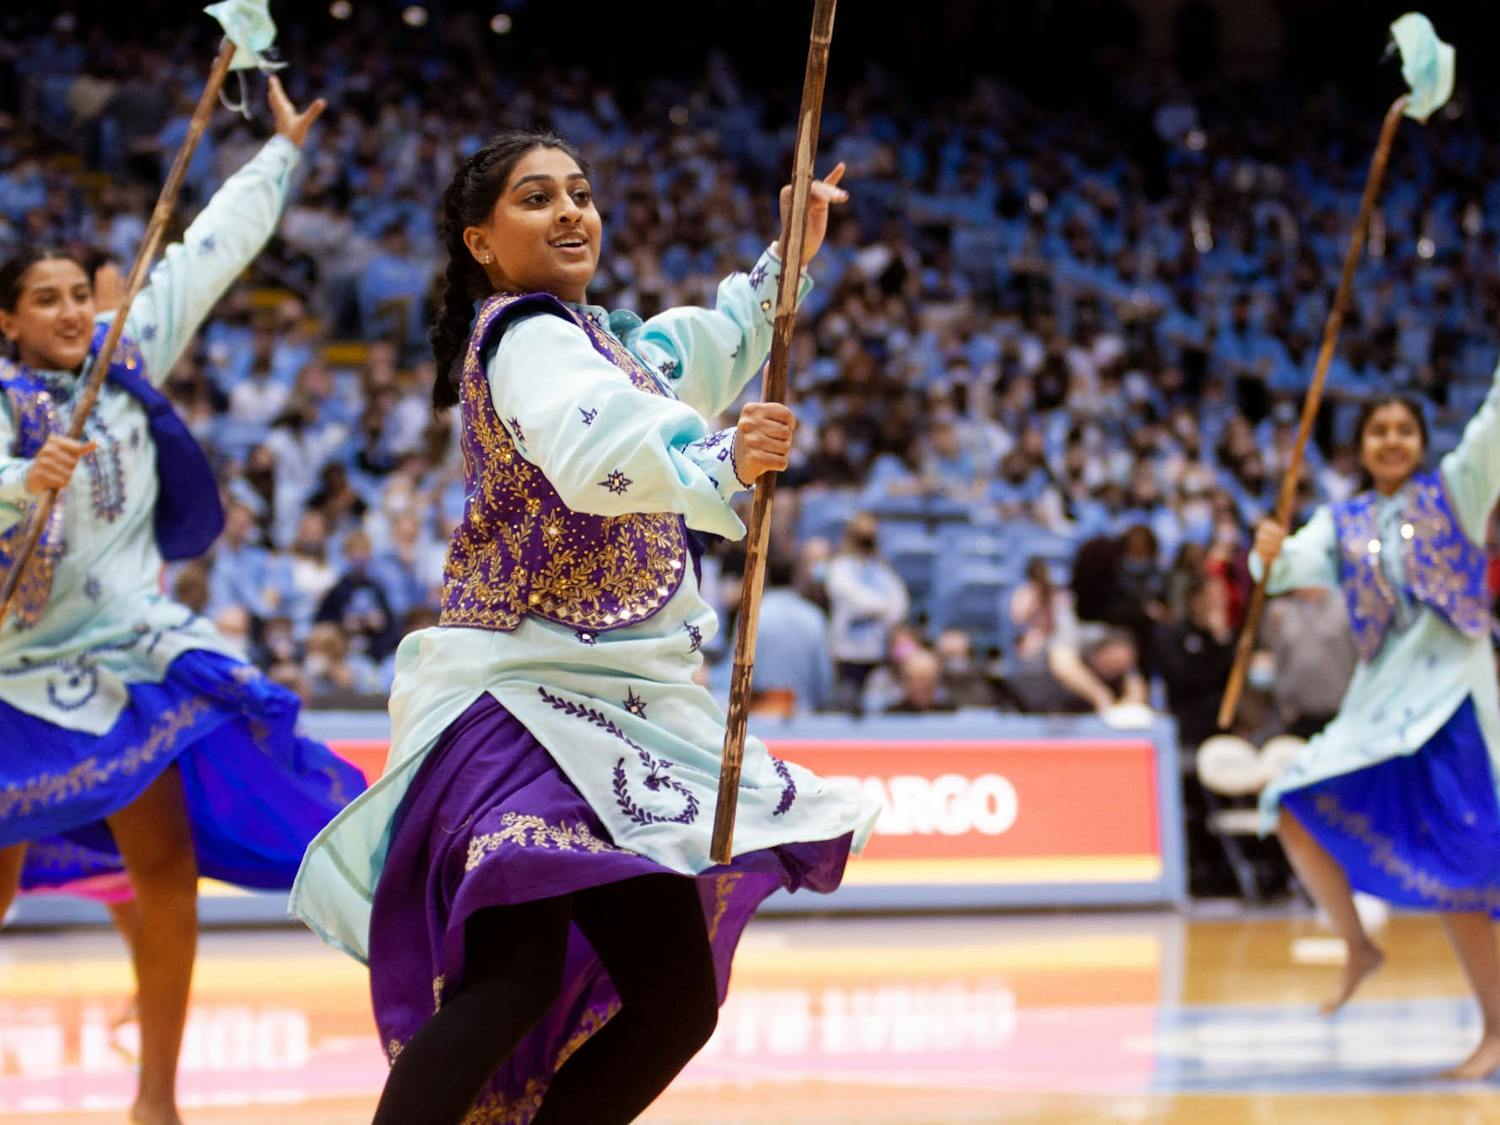 The Bhangra Elite dance team performs during halftime of a men's basketball game at the Dean Smith Center on Monday, Feb. 21, 2022.&nbsp;